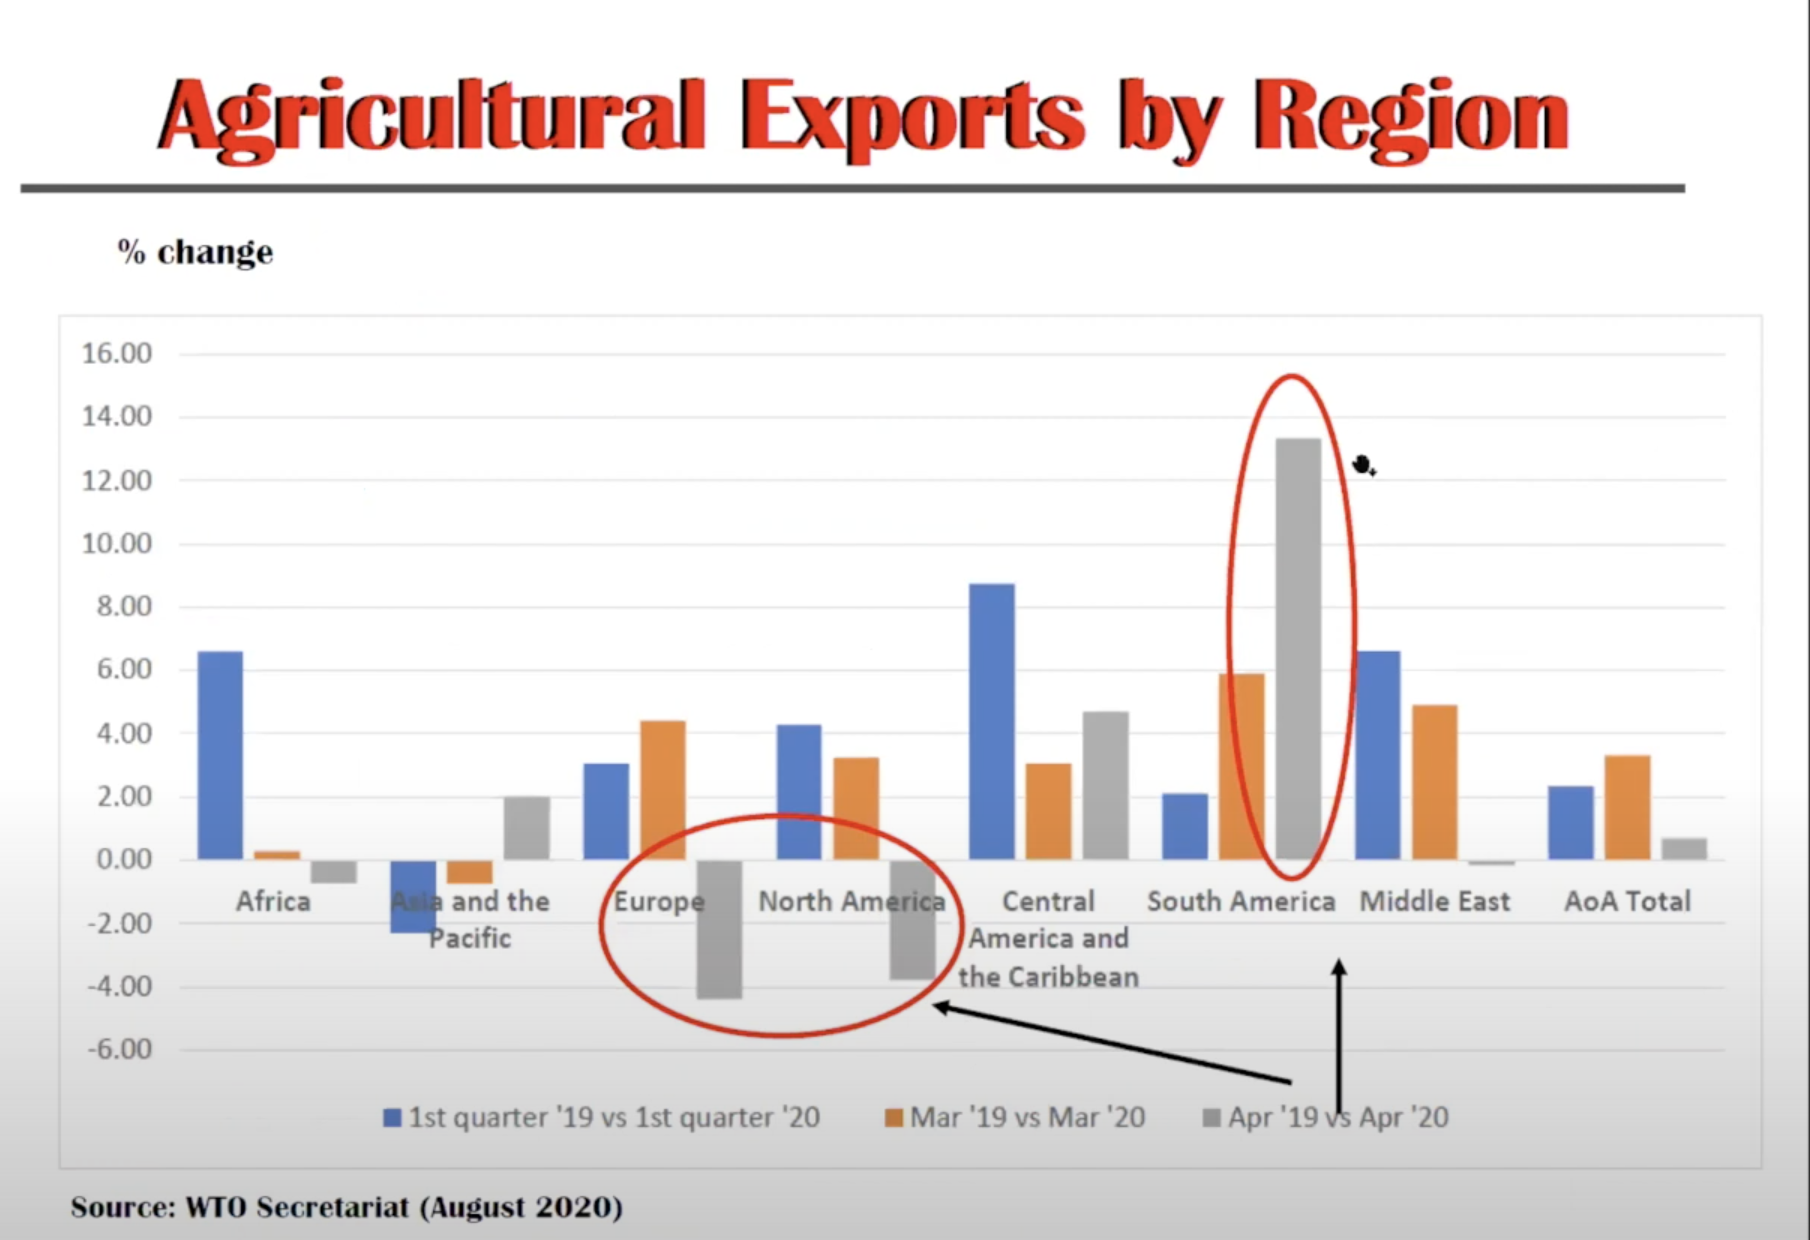 Global ag trade remains fairly steady, but uncertain through pandemic